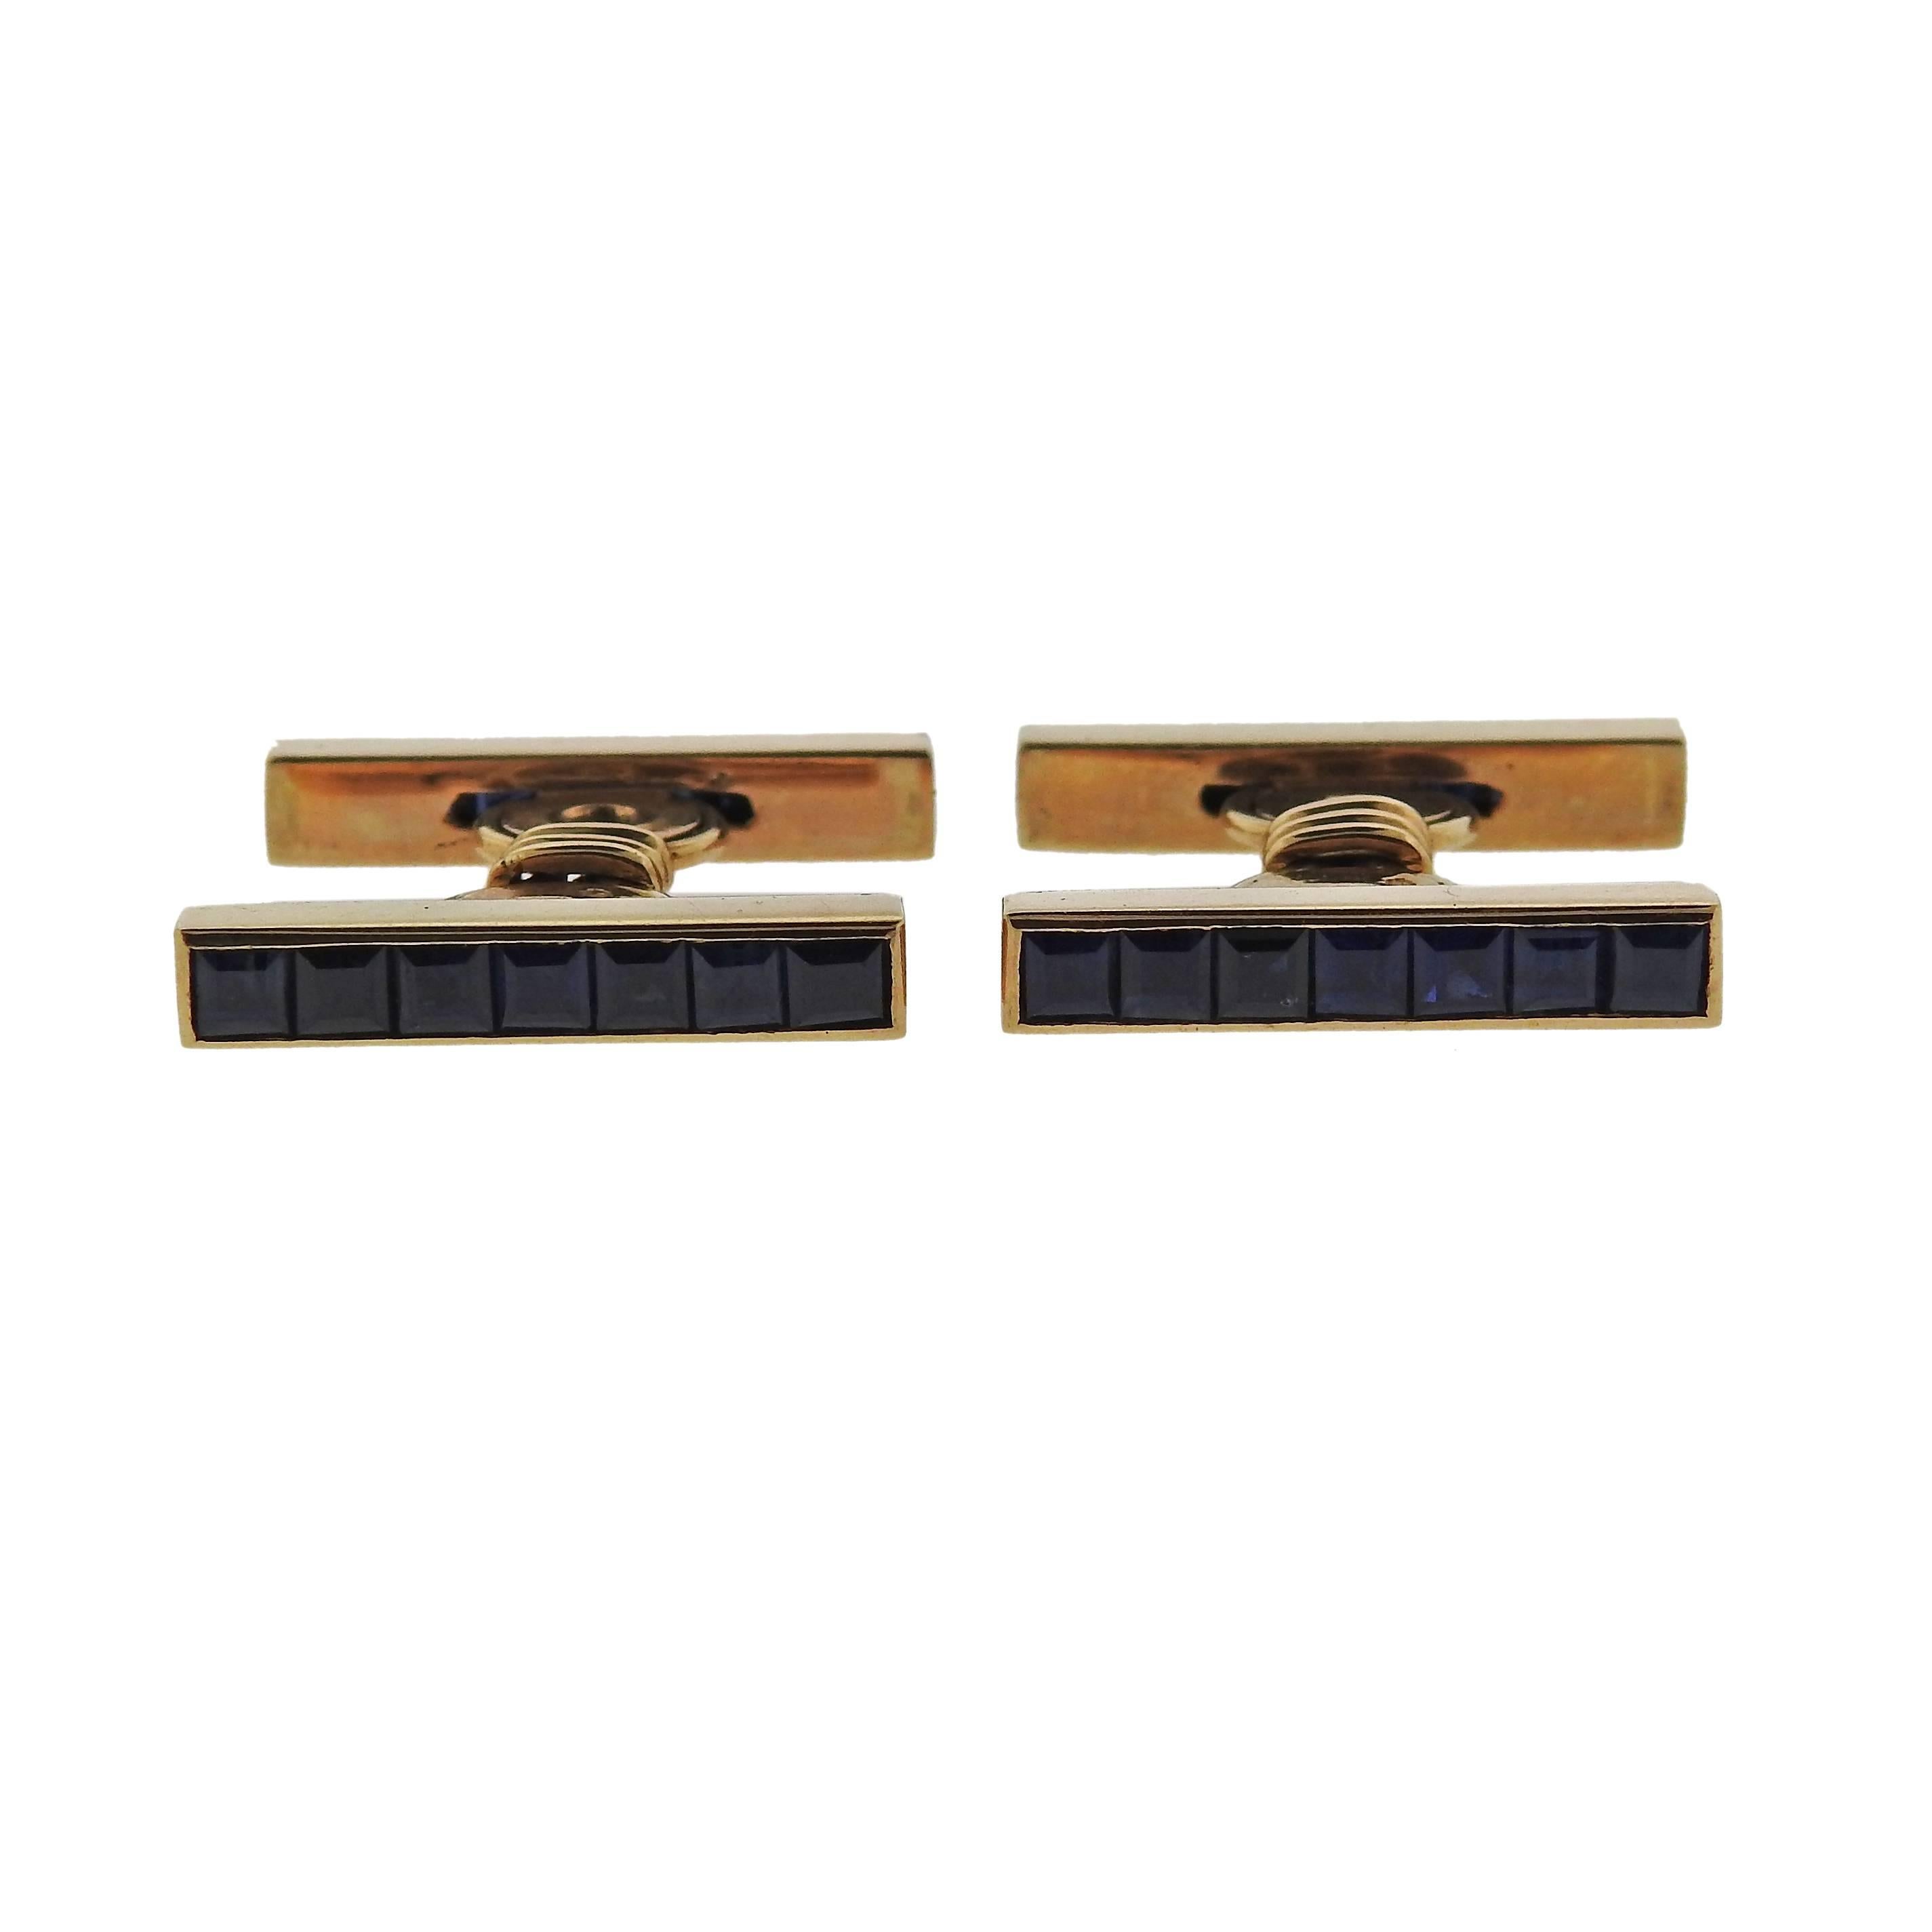 Pair of 18k gold French cufflinks, decorated with blue sapphires. Cufflink top is 11mm x 4mm . Marked with French eagle gold marks. Weight - 11.5 grams.